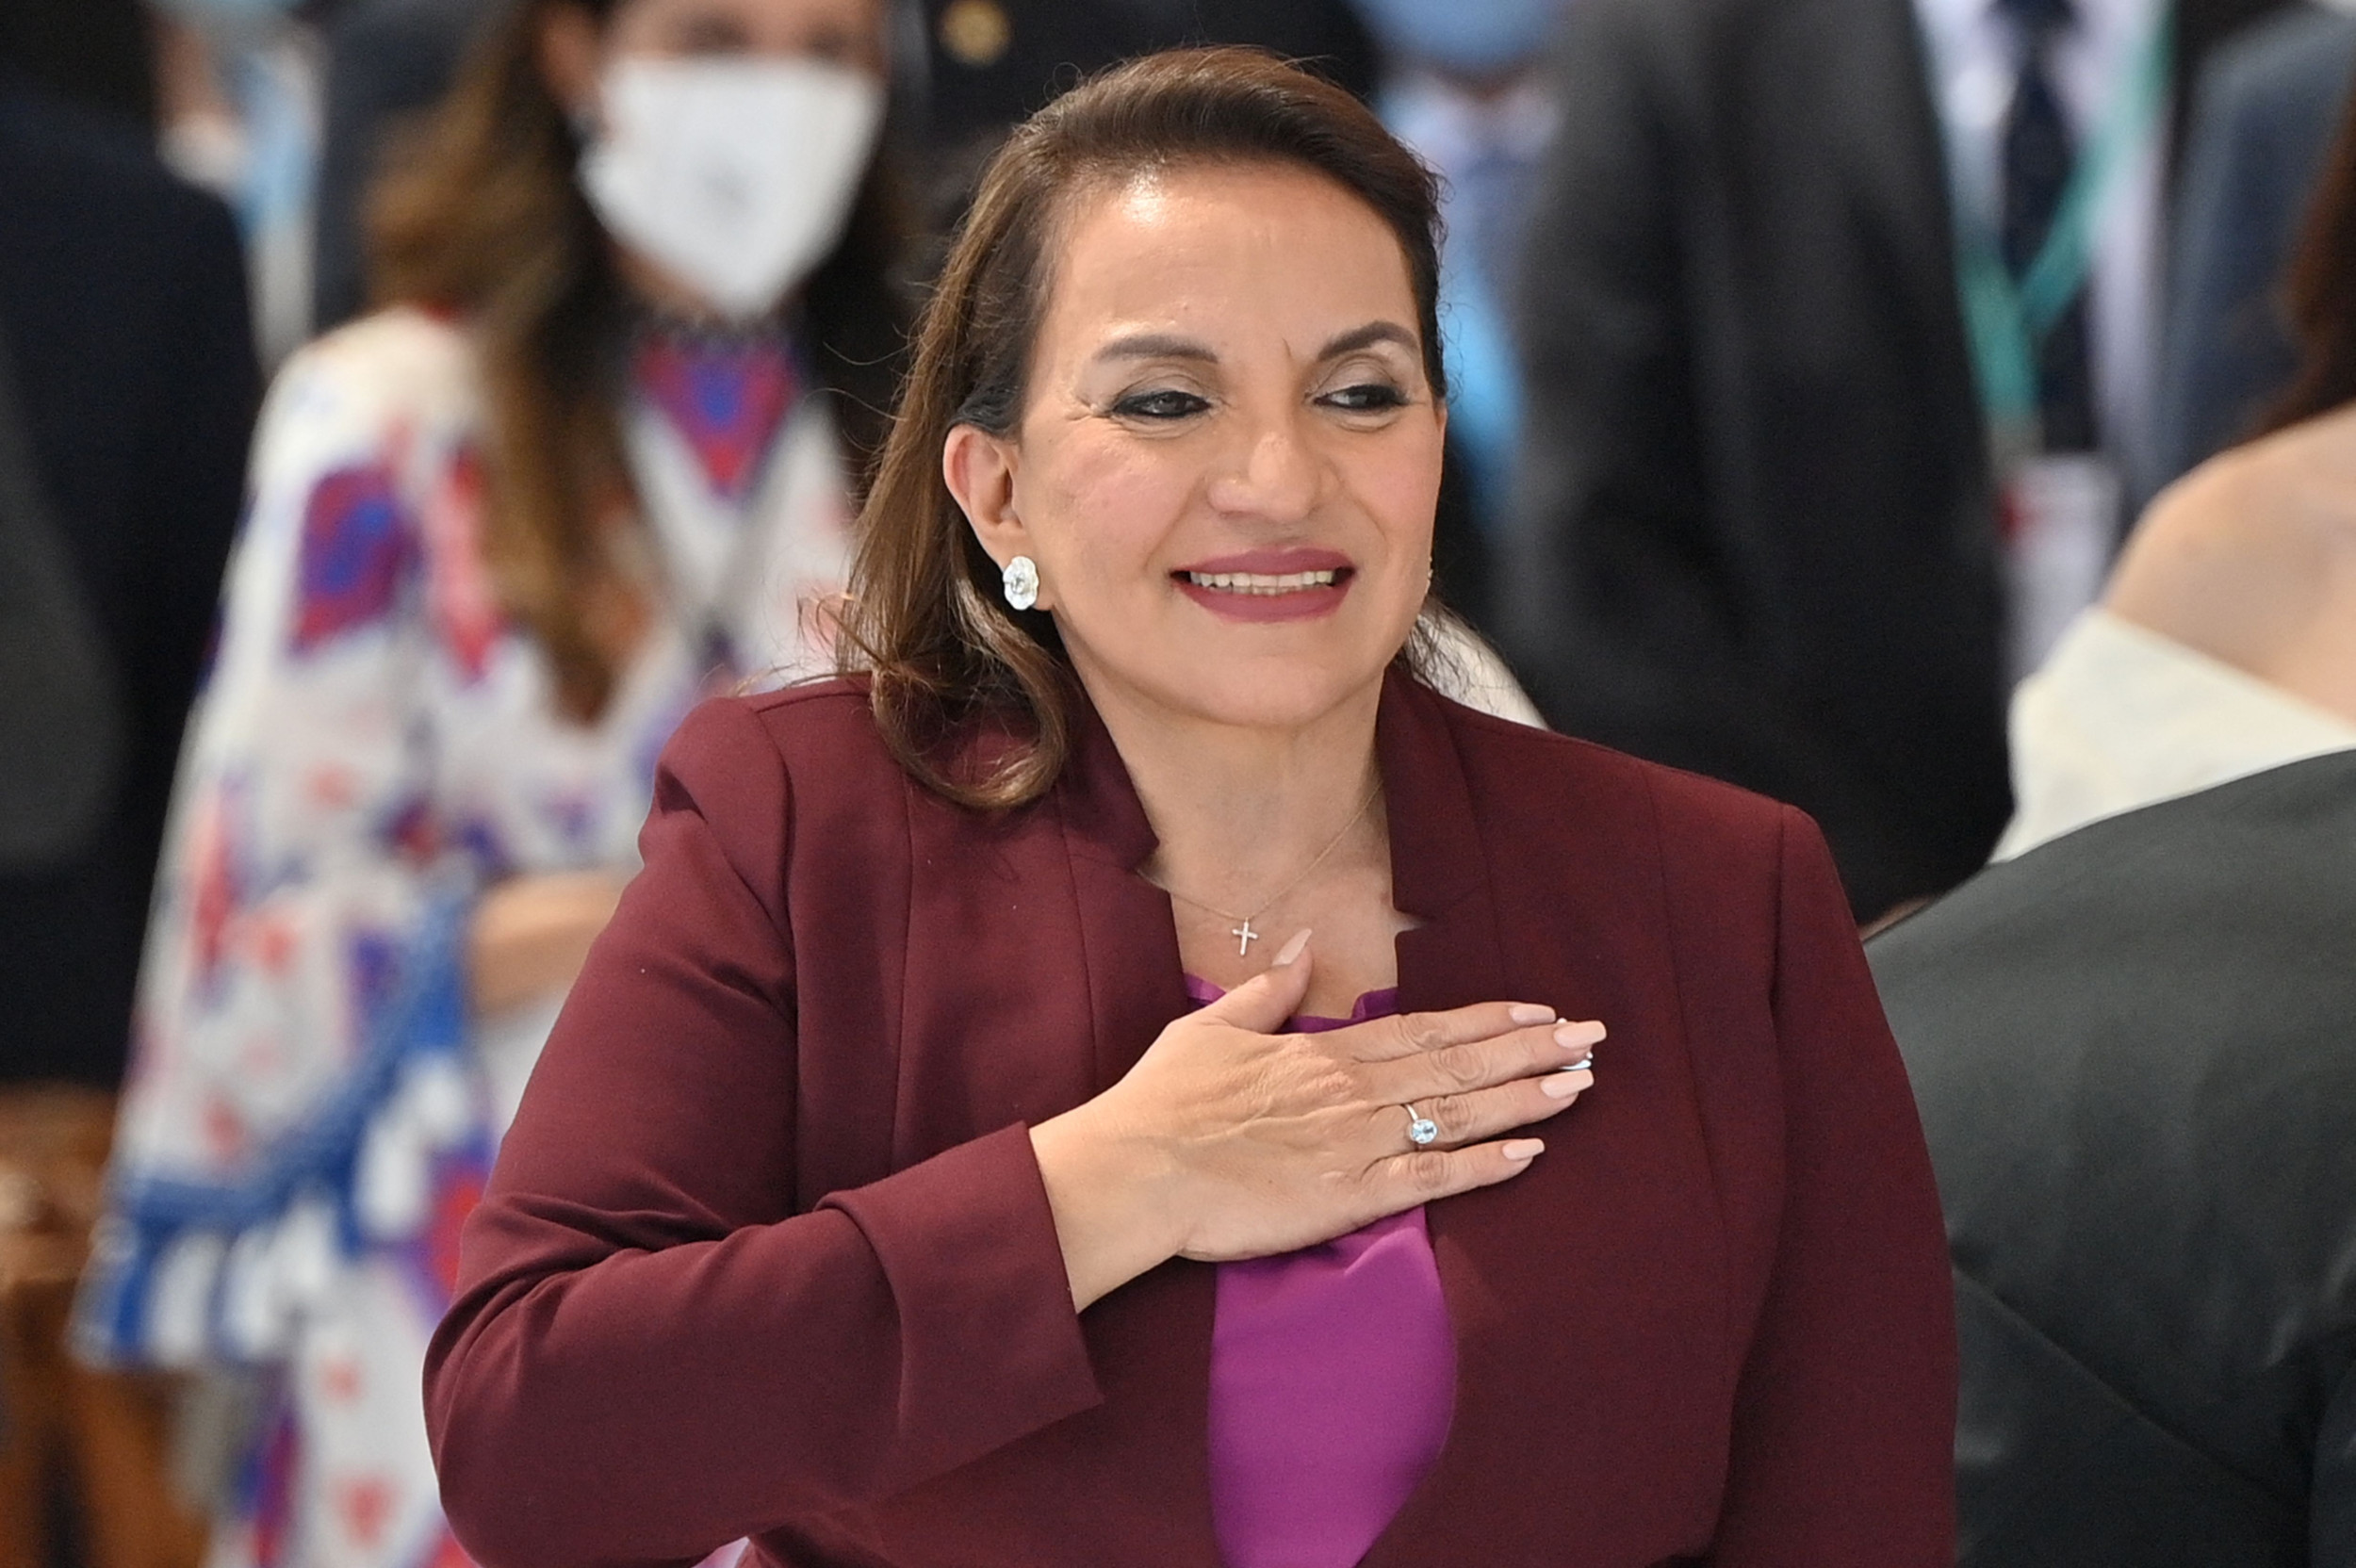 If Honduras' Castro Gets Her Way, the U.S. Will Pay